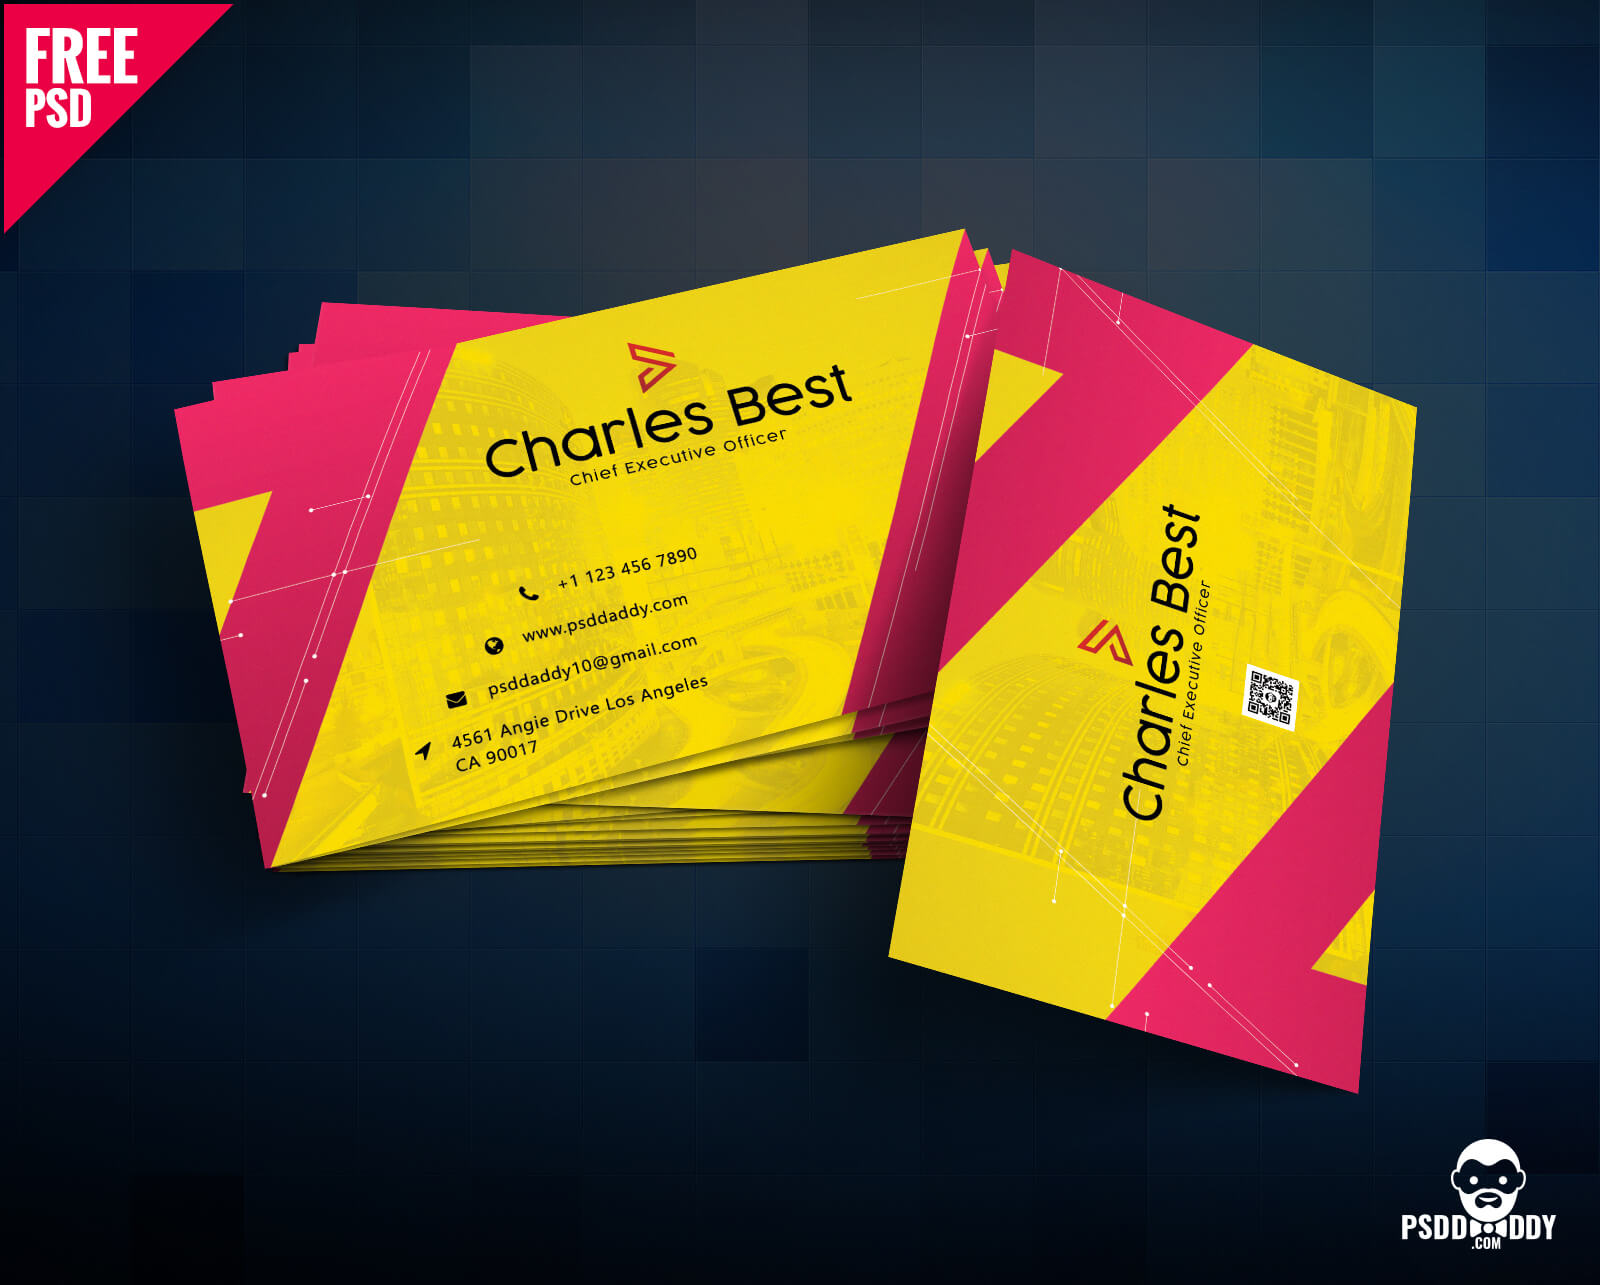 Download] Creative Business Card Free Psd | Psddaddy In Business Card Size Template Psd